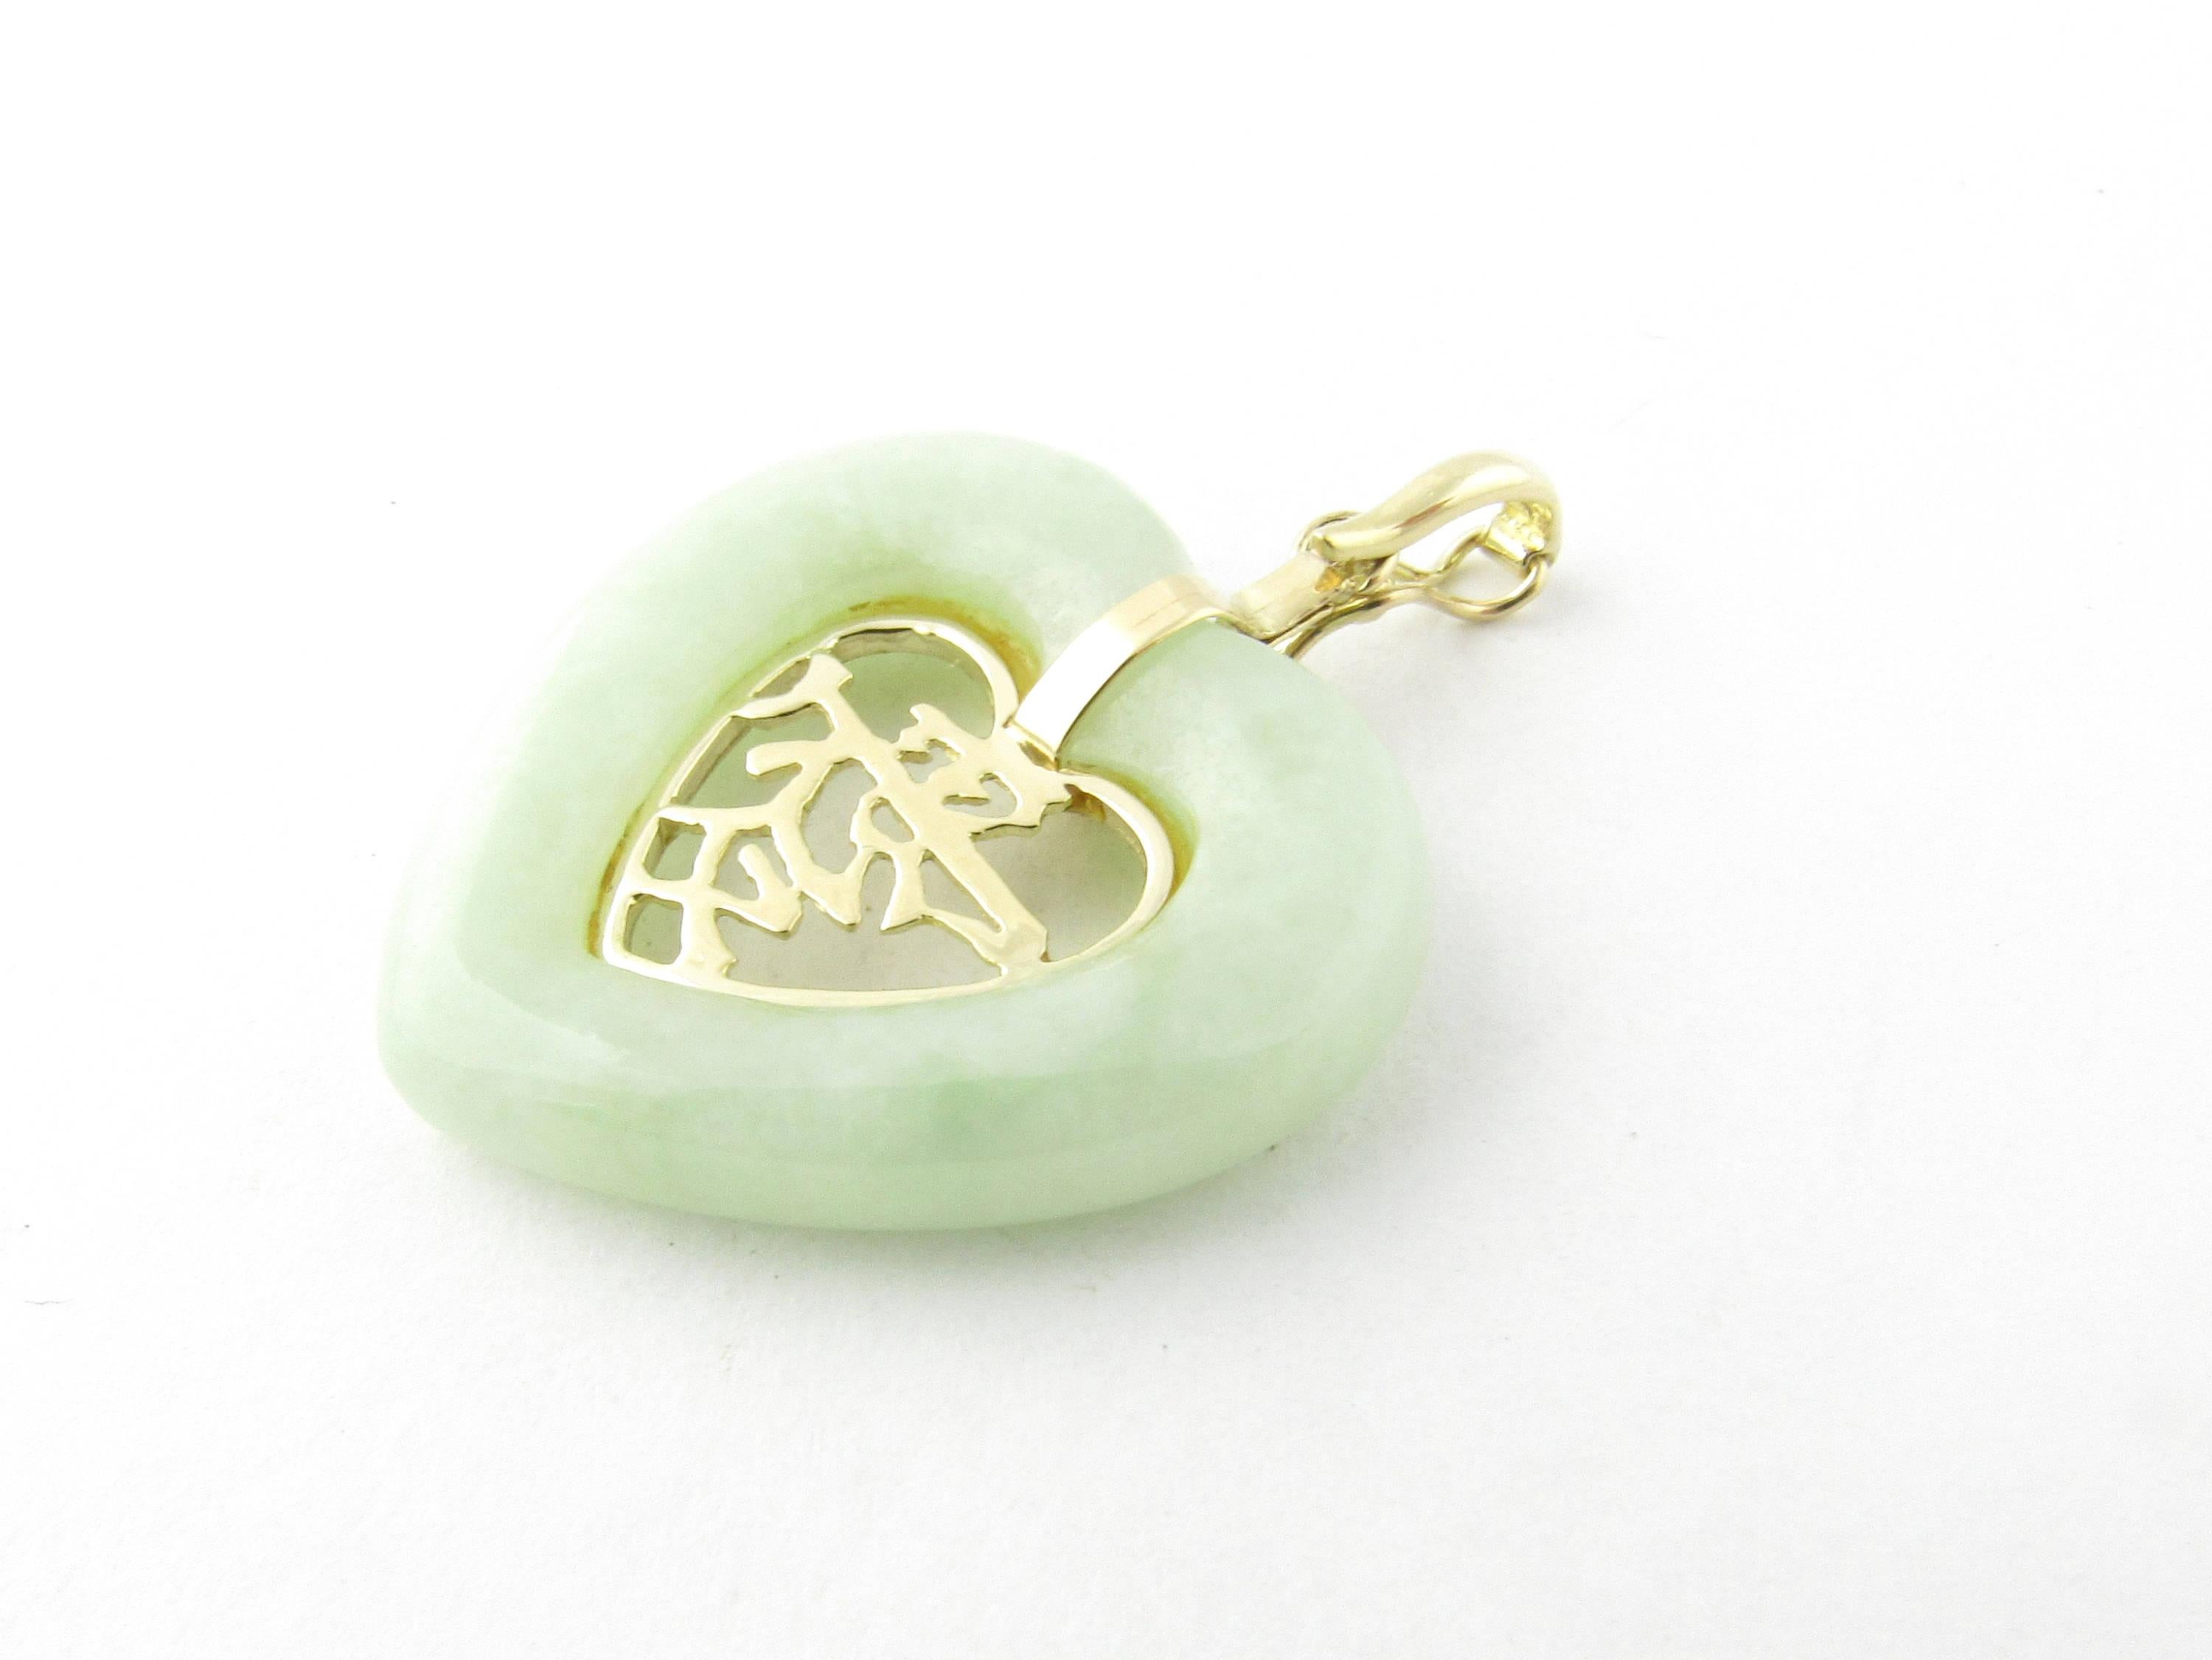 Vintage 14 Karat Yellow Gold and Jade Pendant-

This lovely pendant features a jade heart encircling the Chinese characters for 